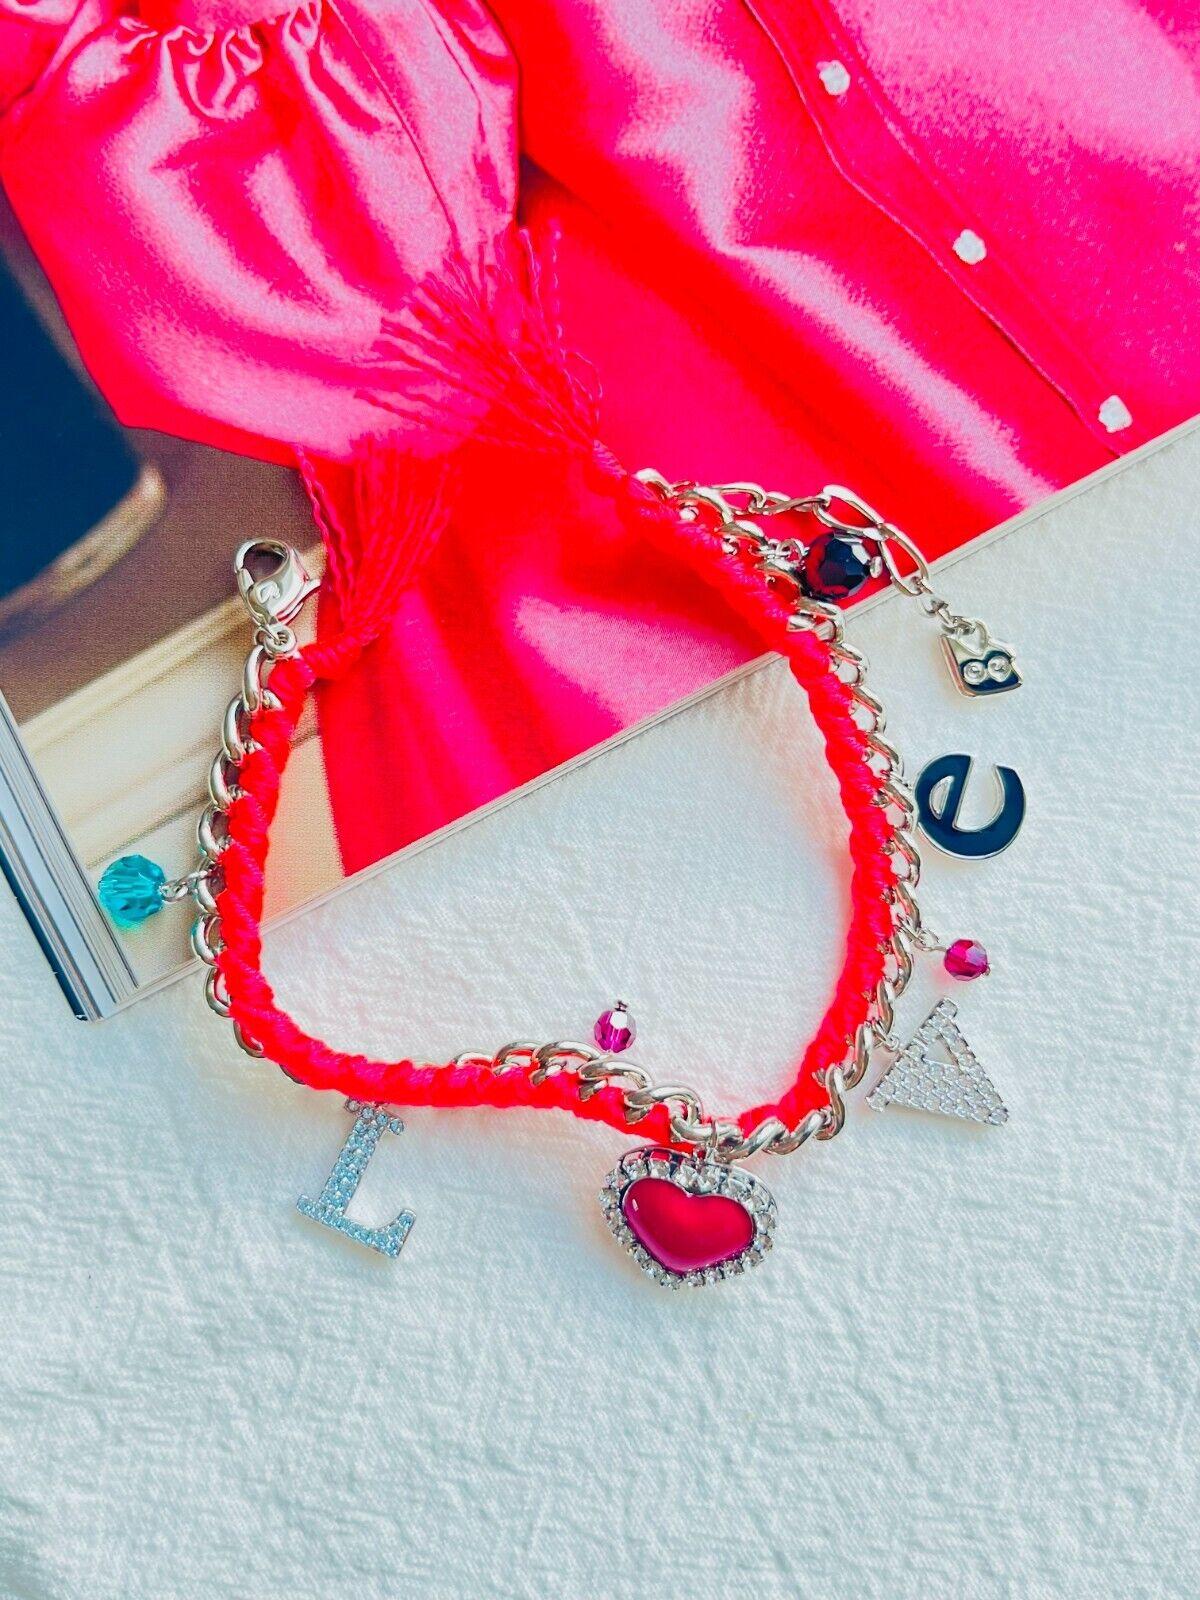 Swarovski Love Heart Charm Alphabet Shining Crystals Pink Red Bracelet Silver Tone

Decorated with eight charms – an “L” and “V” set with Austrian crystals, a red heart with an Austrian crystal border, a black enamel “e” and four coloured oval